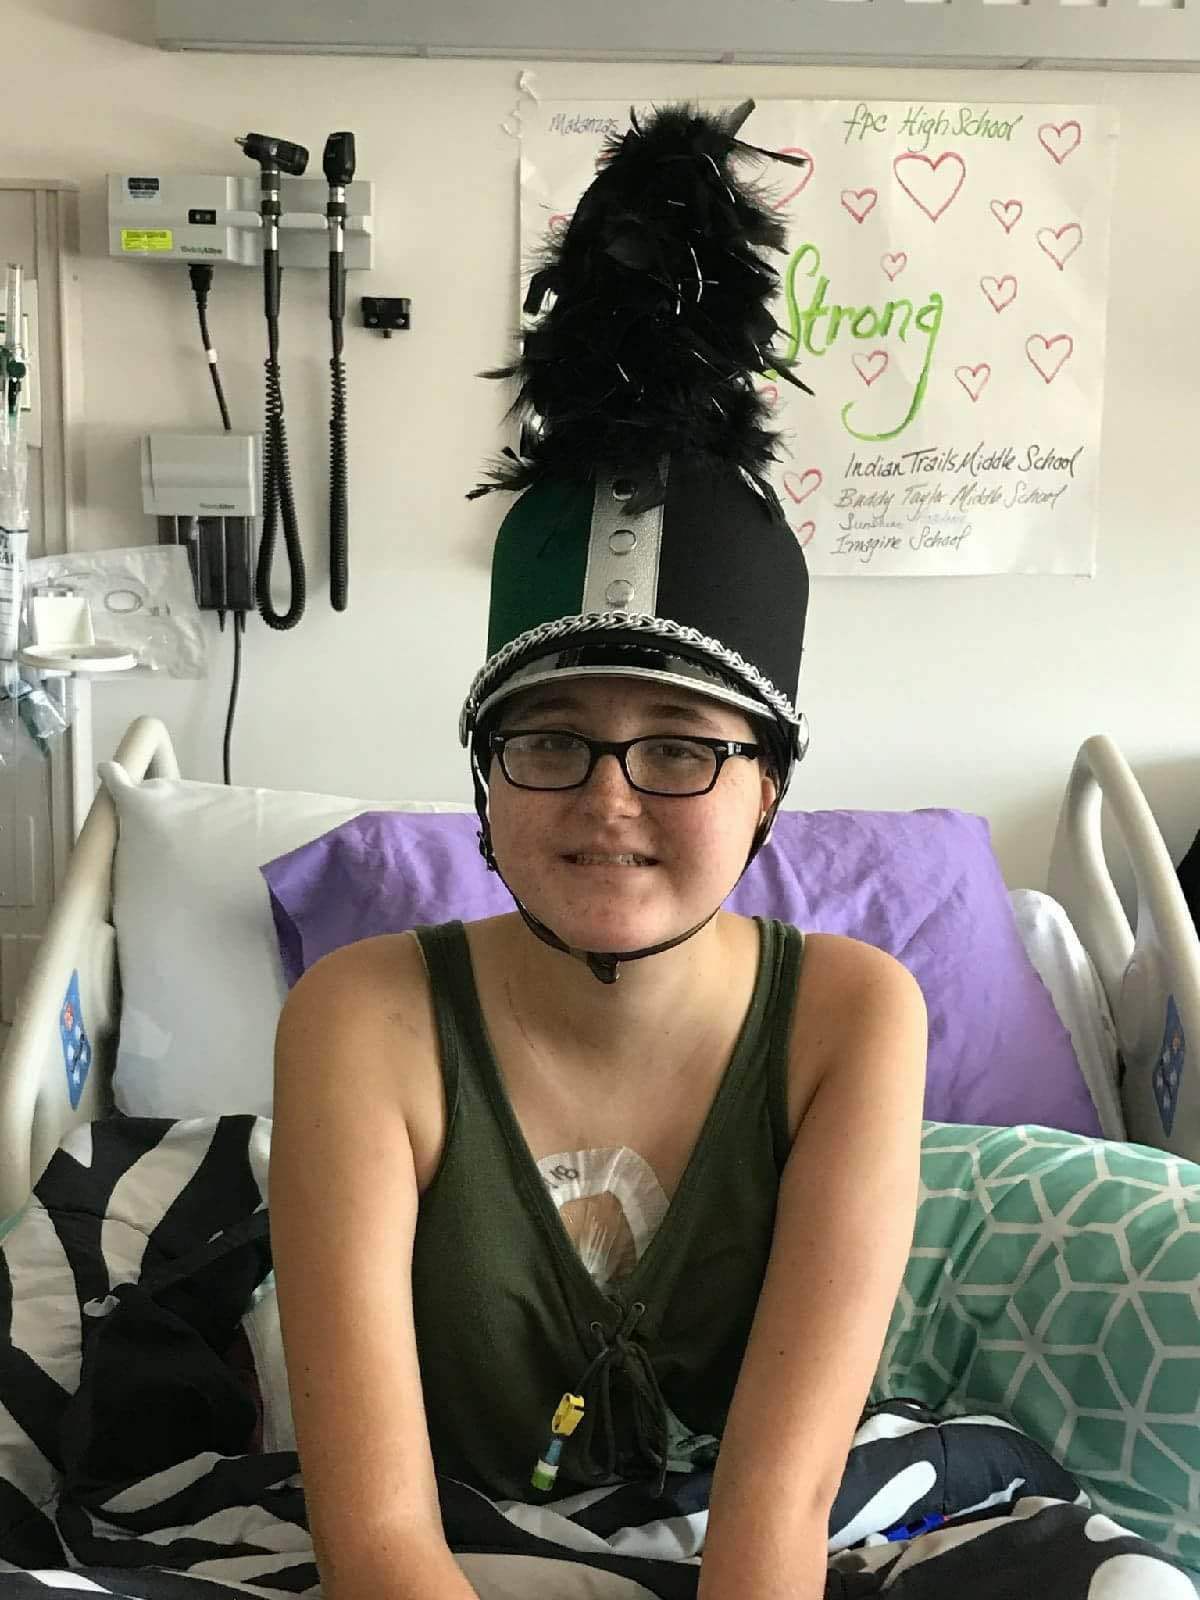 Toniann Mussleman poses with her band hat in the hospital. Photo courtesy of John Koller